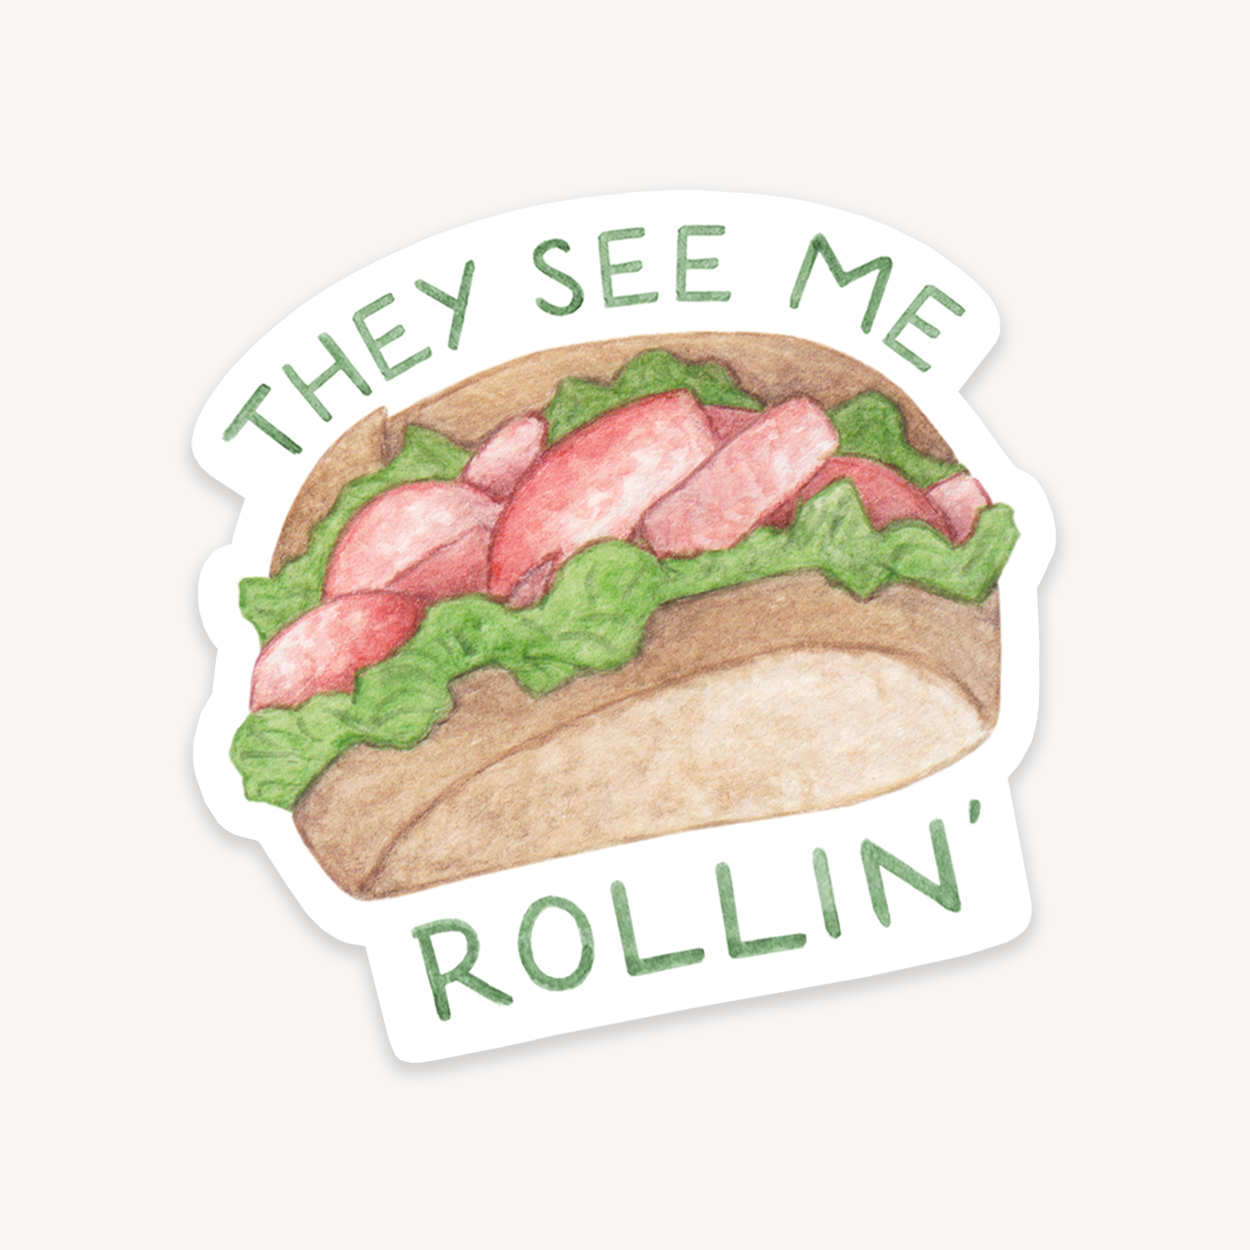 They See Me (Lobster) Rollin&#39; Sticker